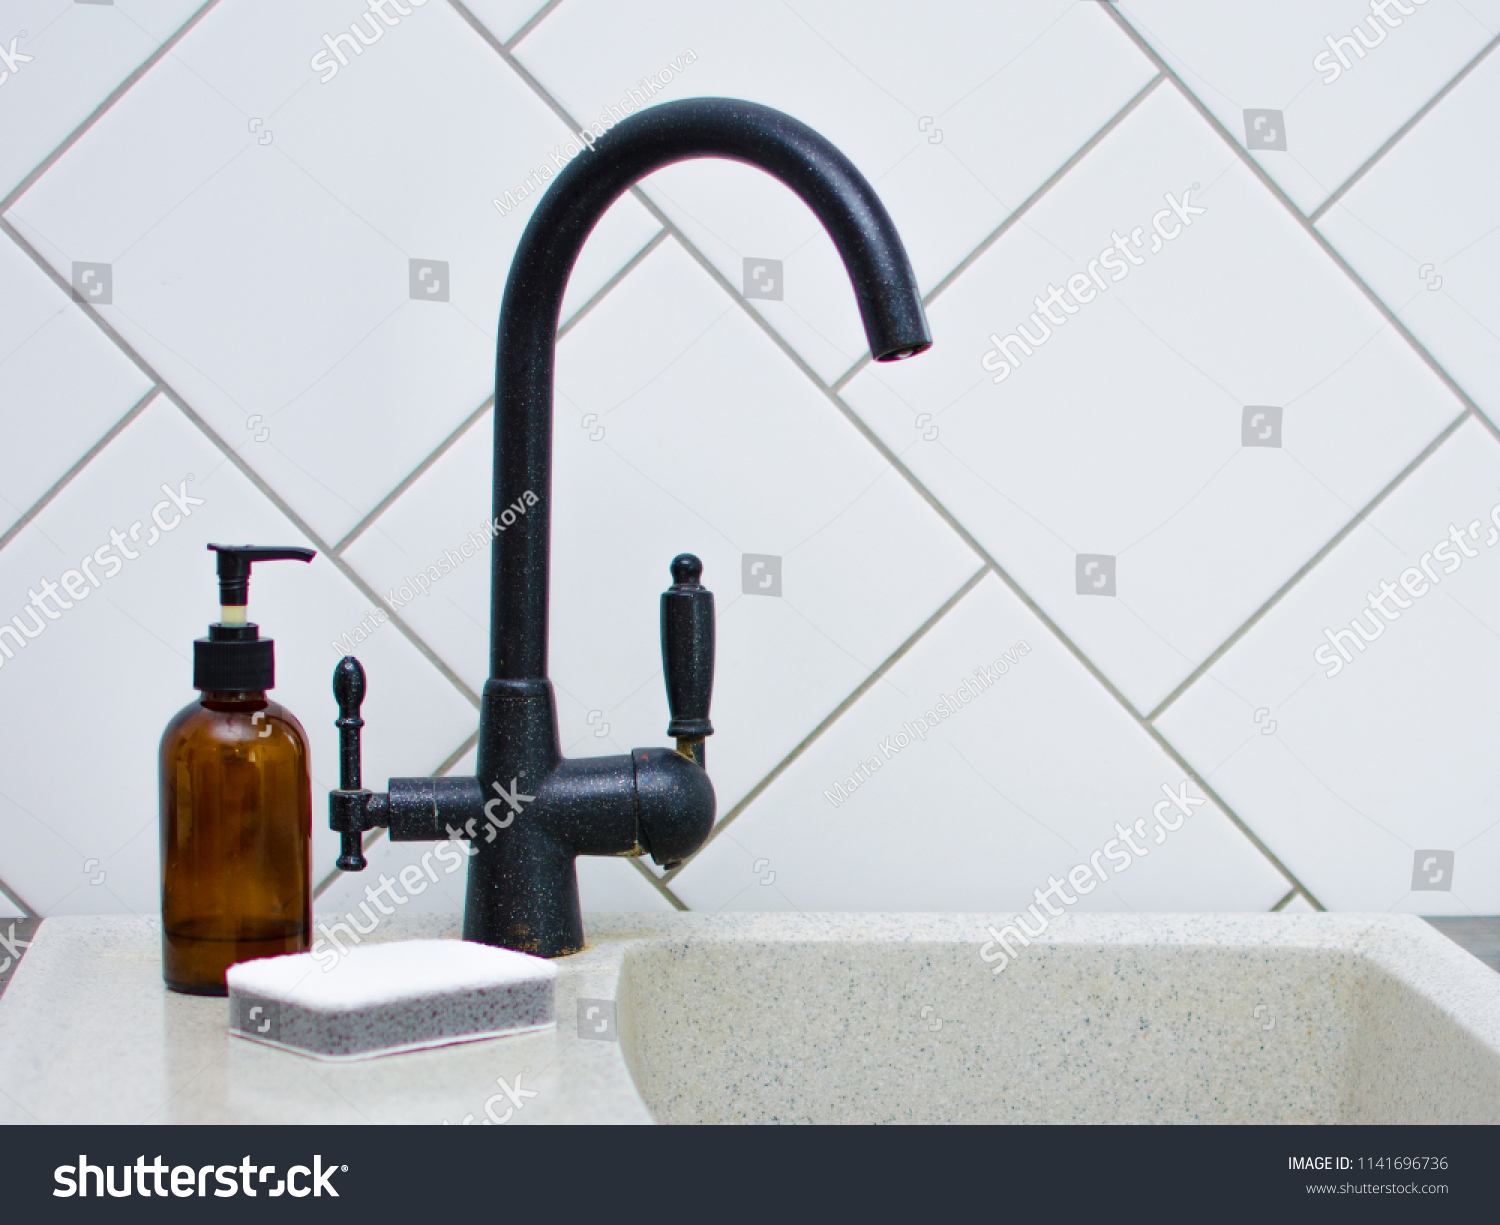 Black Water Faucet Glass Brown Jar Stock Image Download Now